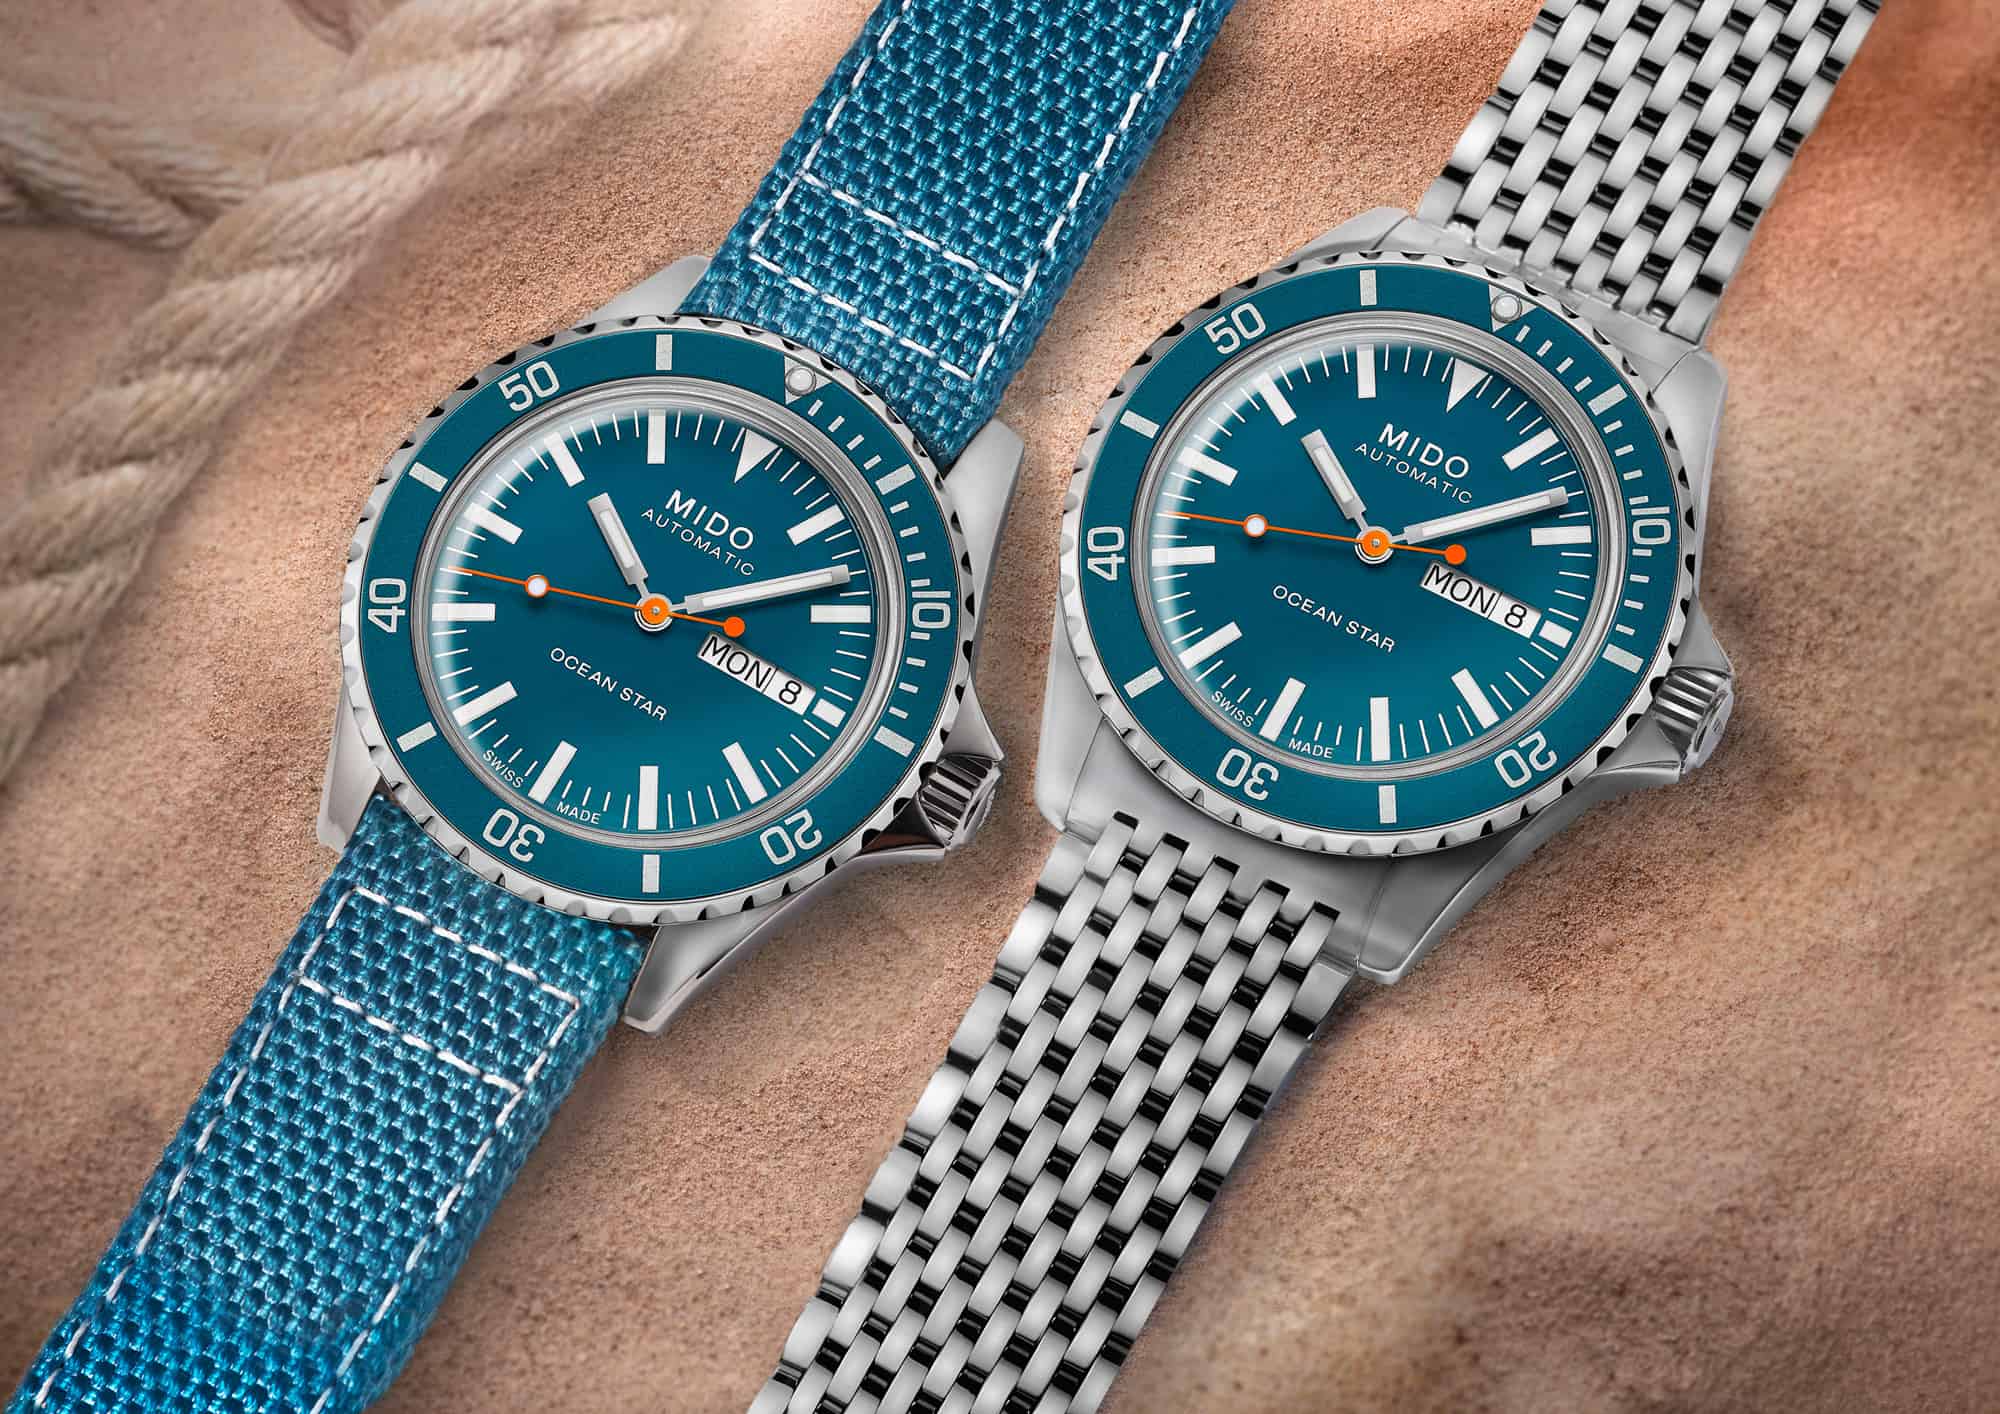 Introducing the Mido Ocean Star Tribute Special Edition - Worn & Wound